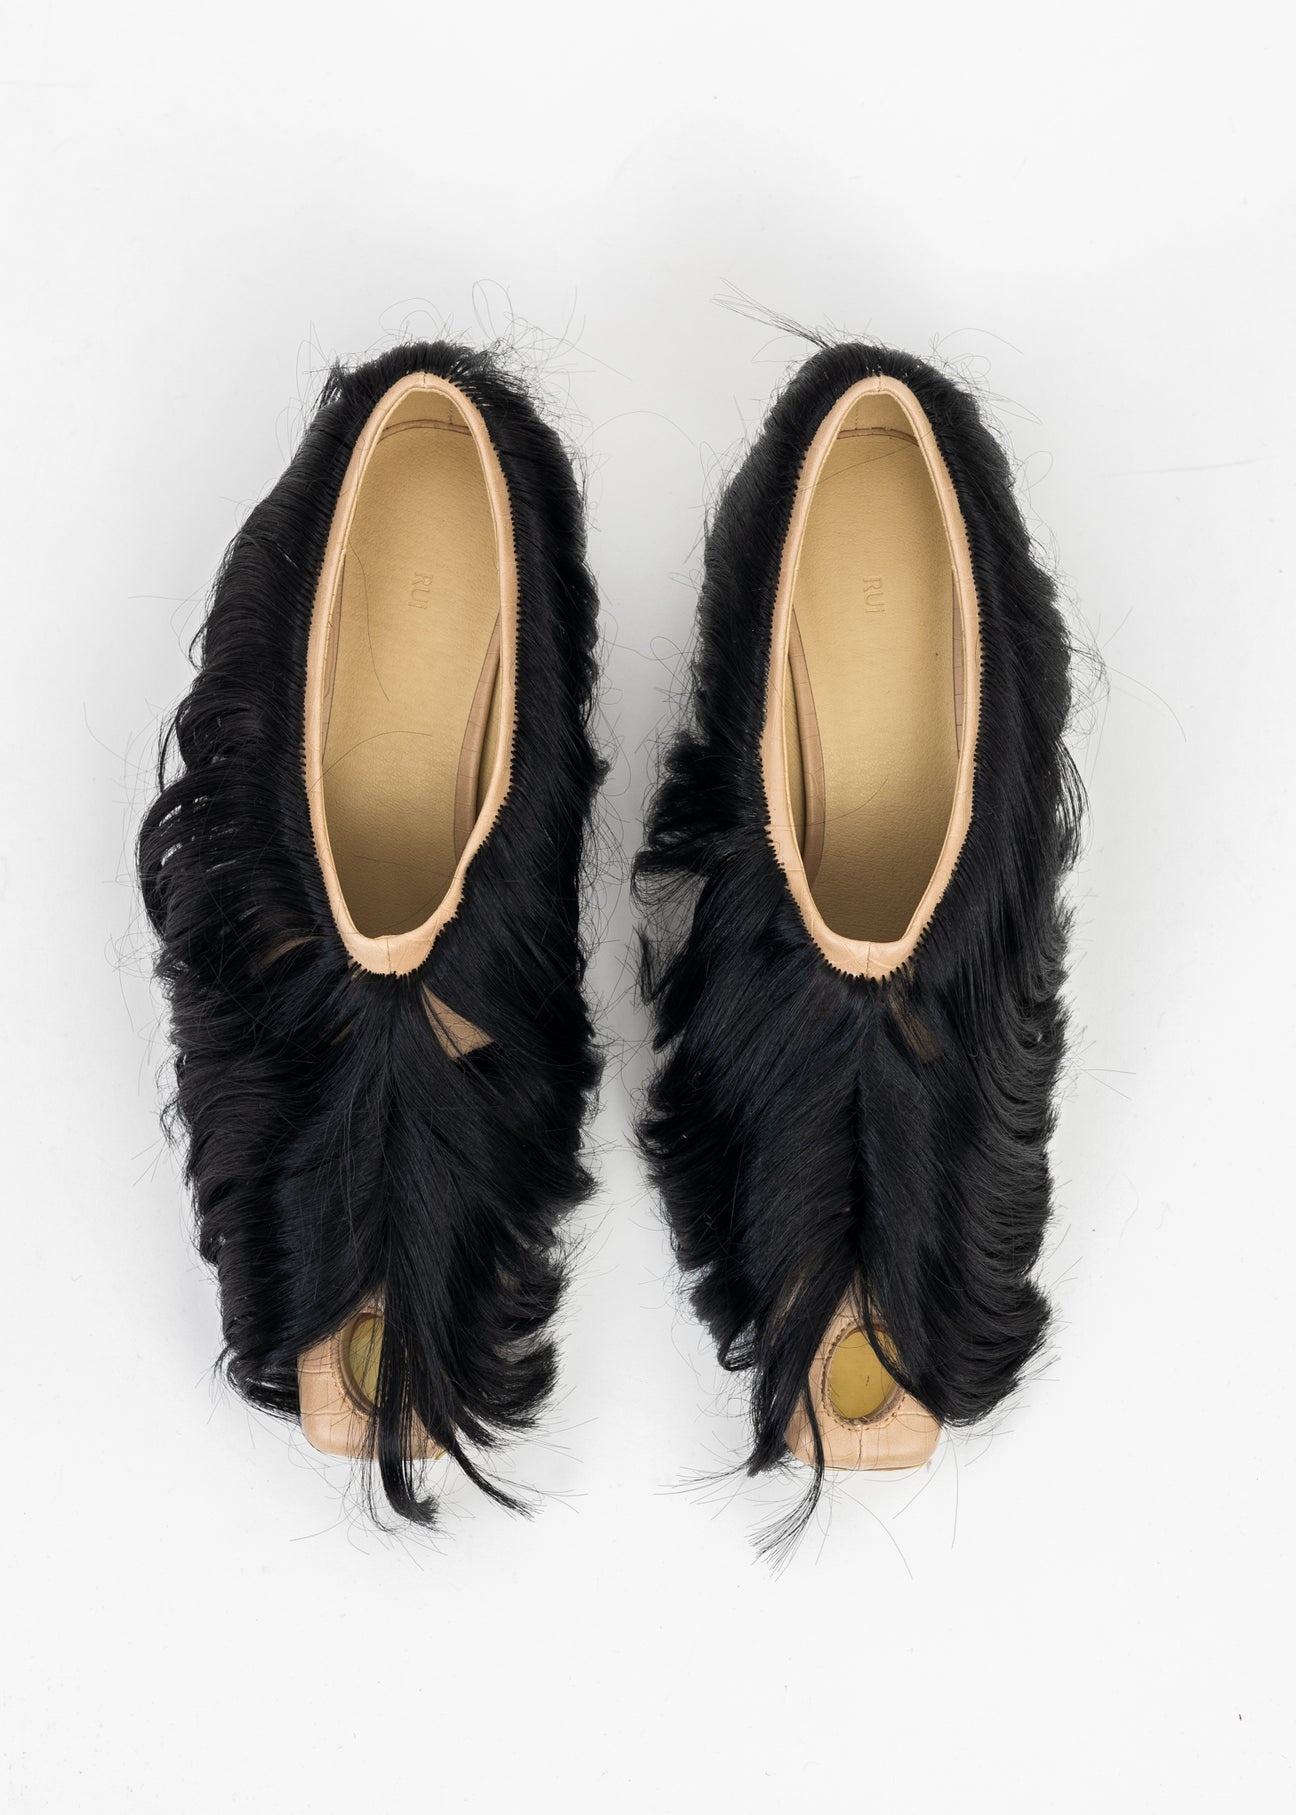 FICELLE WITH ONYX HAIR CUT-OUT HAIRY PUMP HEELS - 6